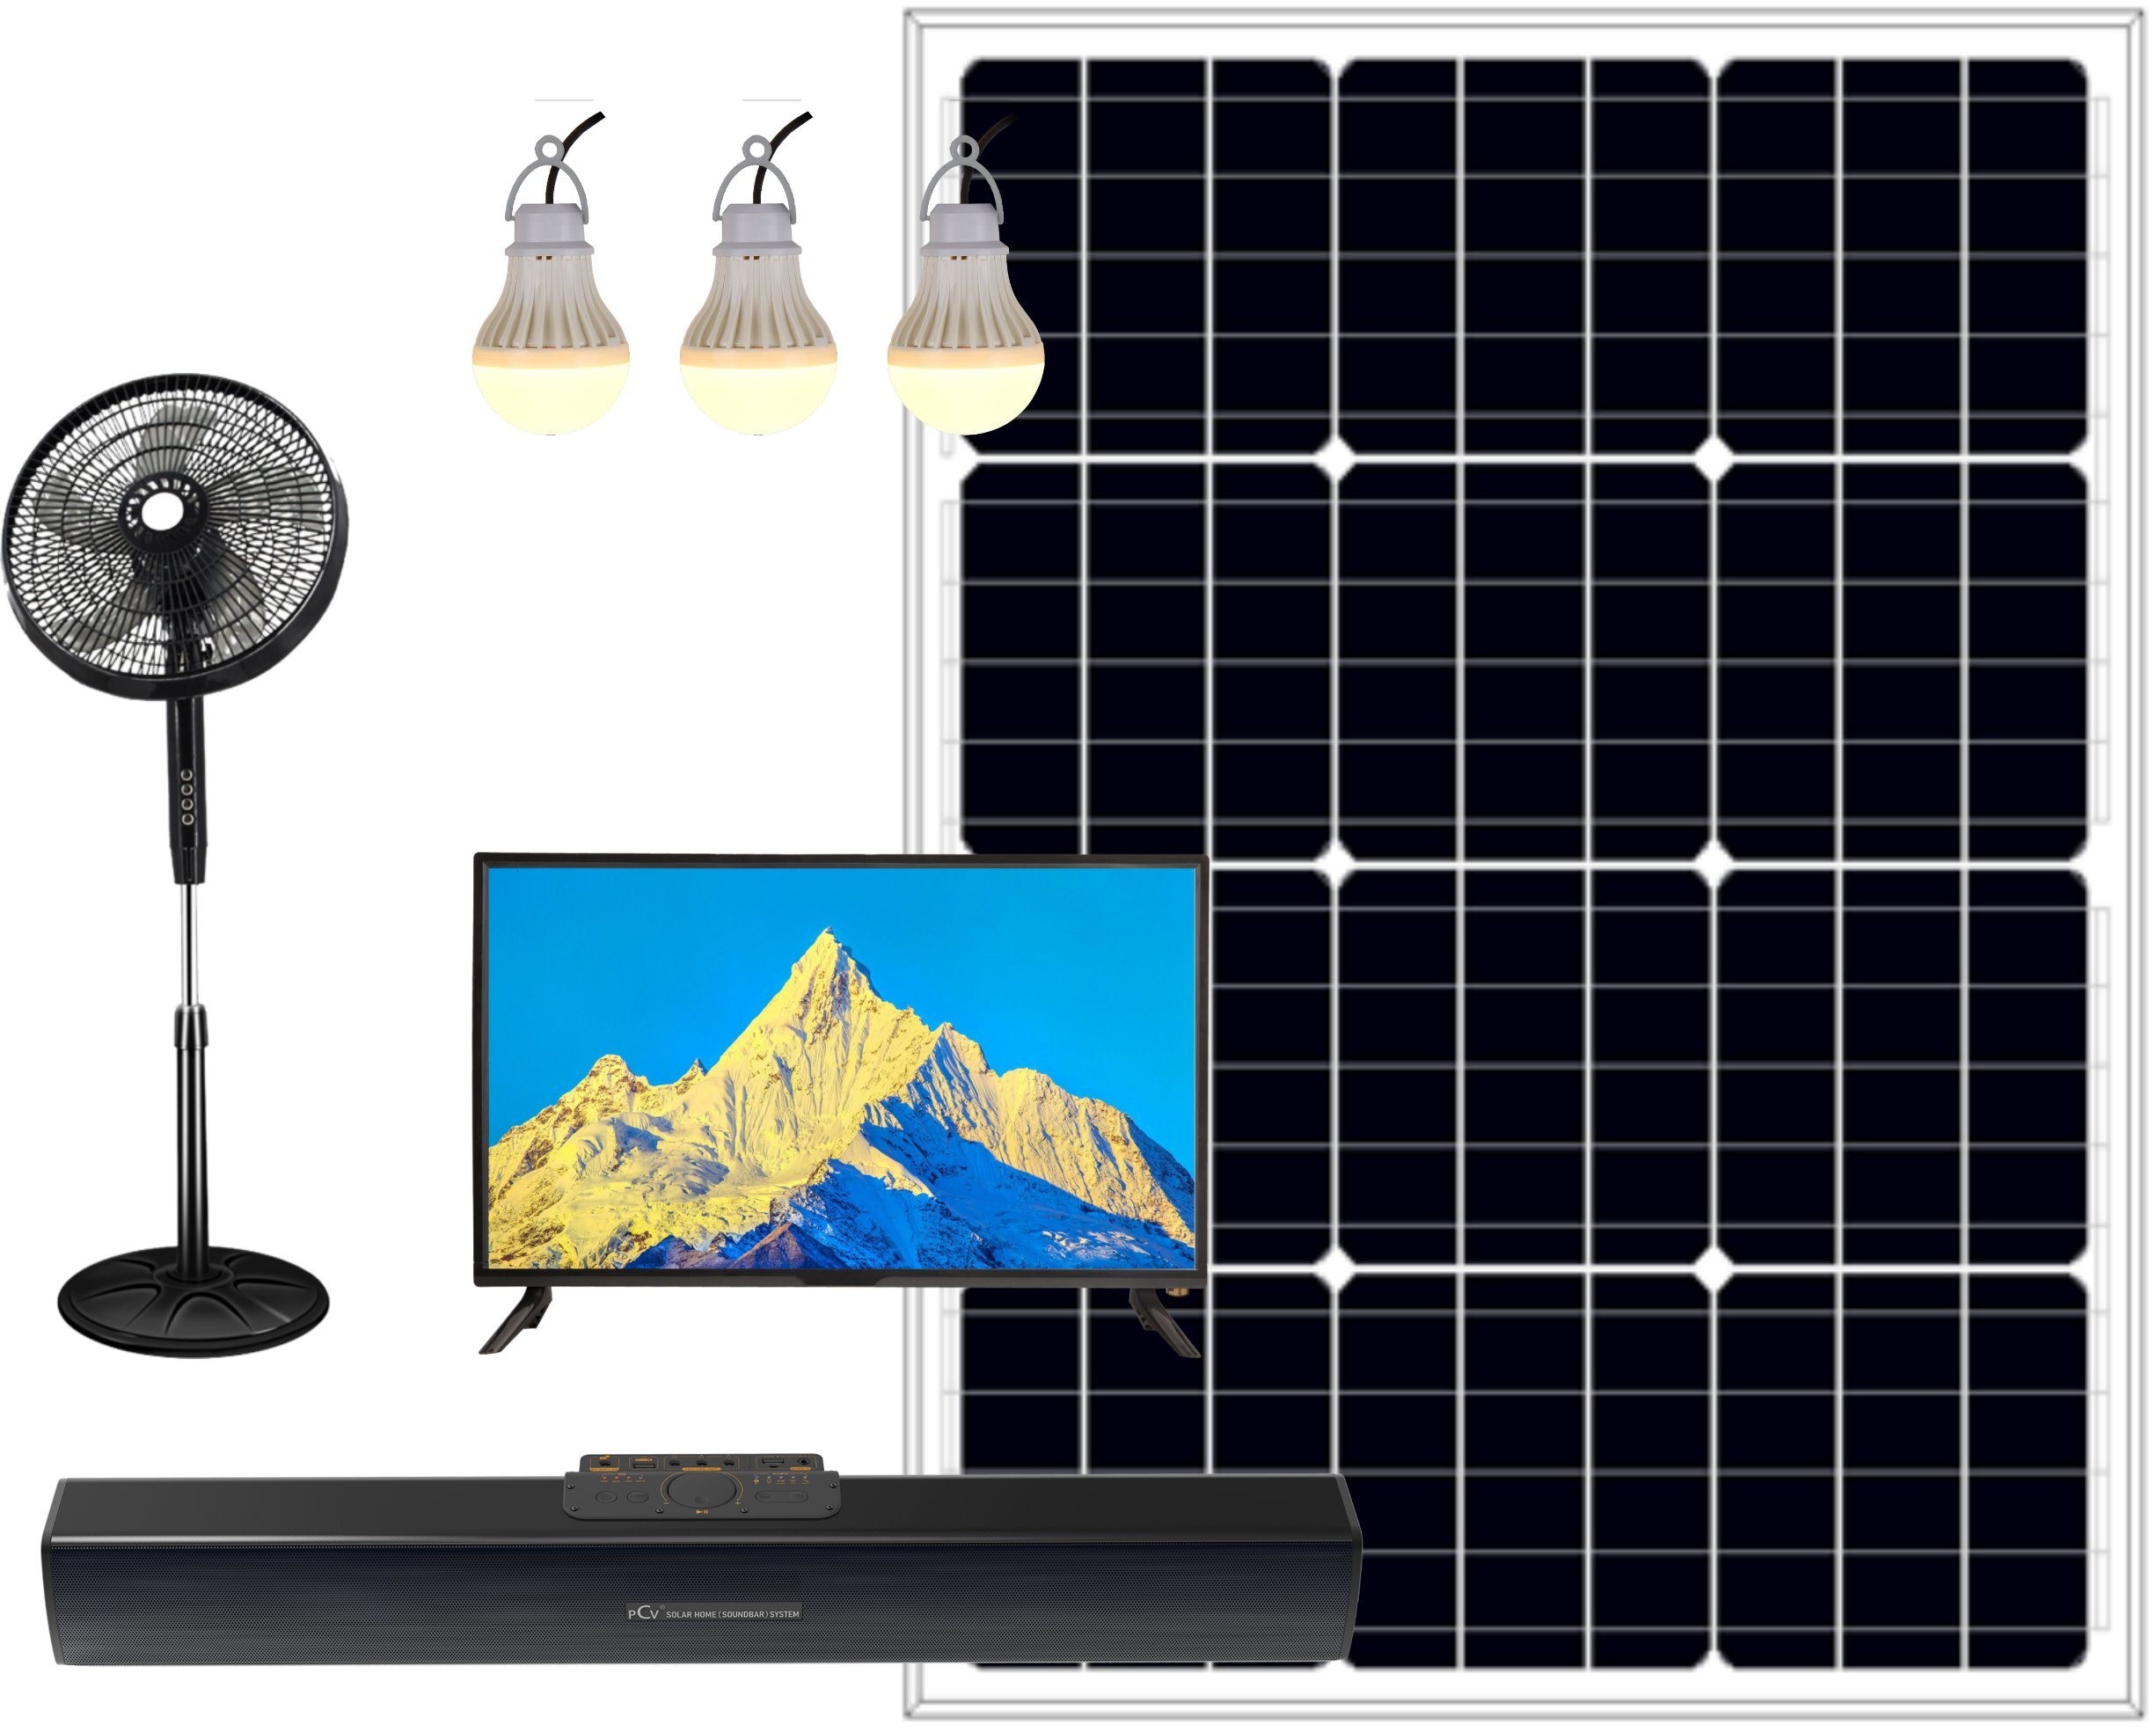 Solar Home Generator Kits System with Battery Chargeable HiFi Speaker Soundbar DC Power TV Fan USB Charge Phone